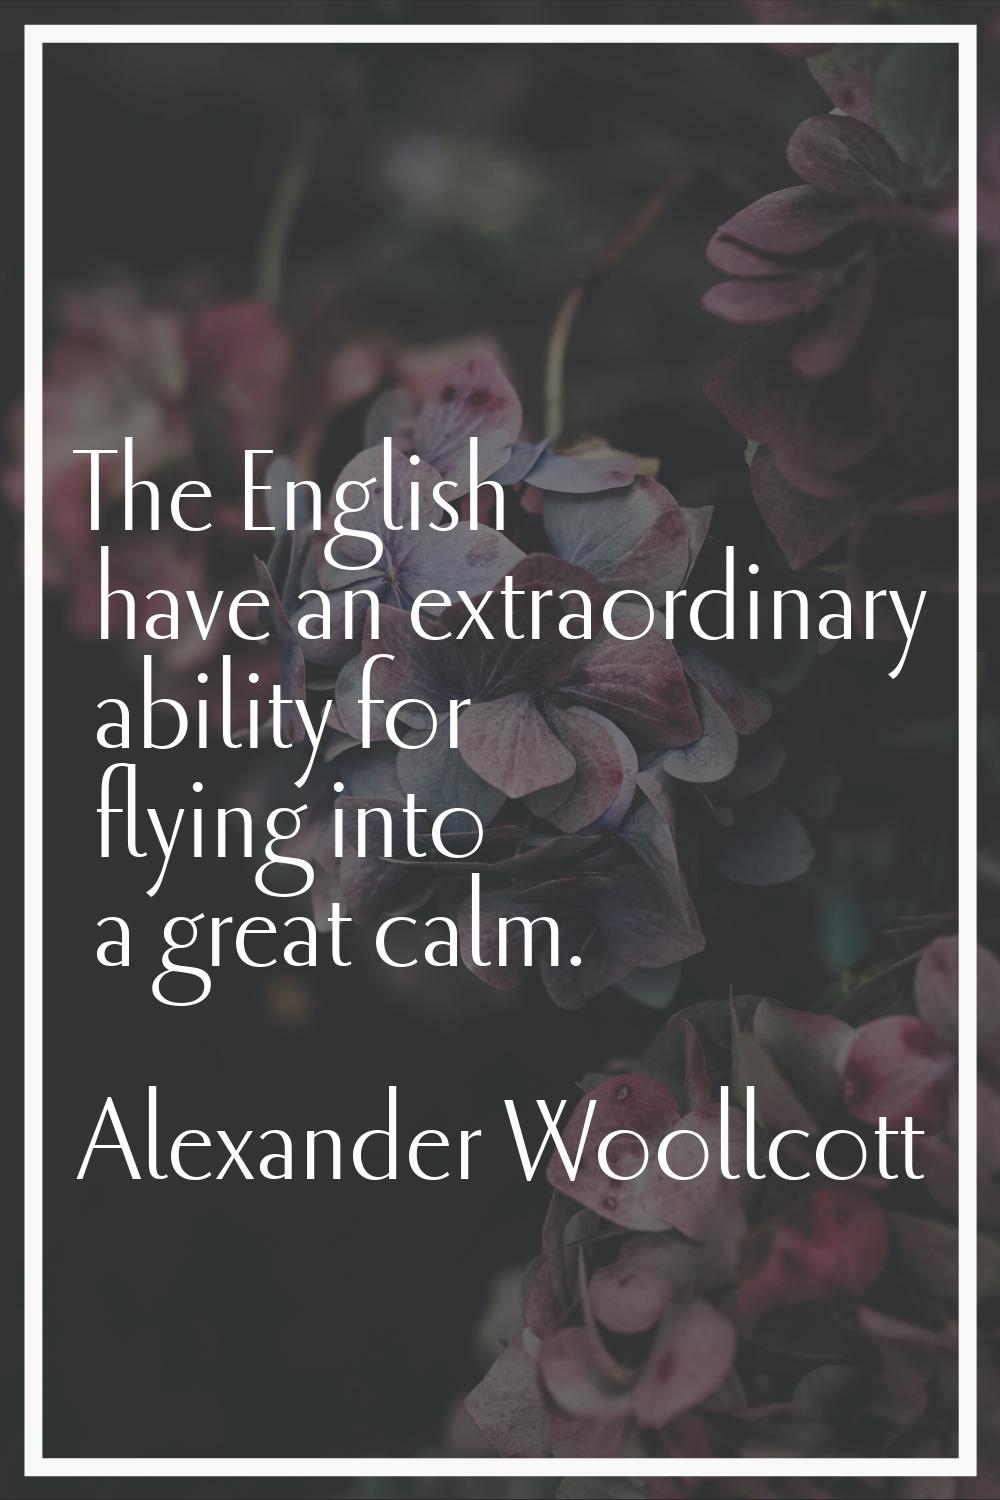 The English have an extraordinary ability for flying into a great calm.